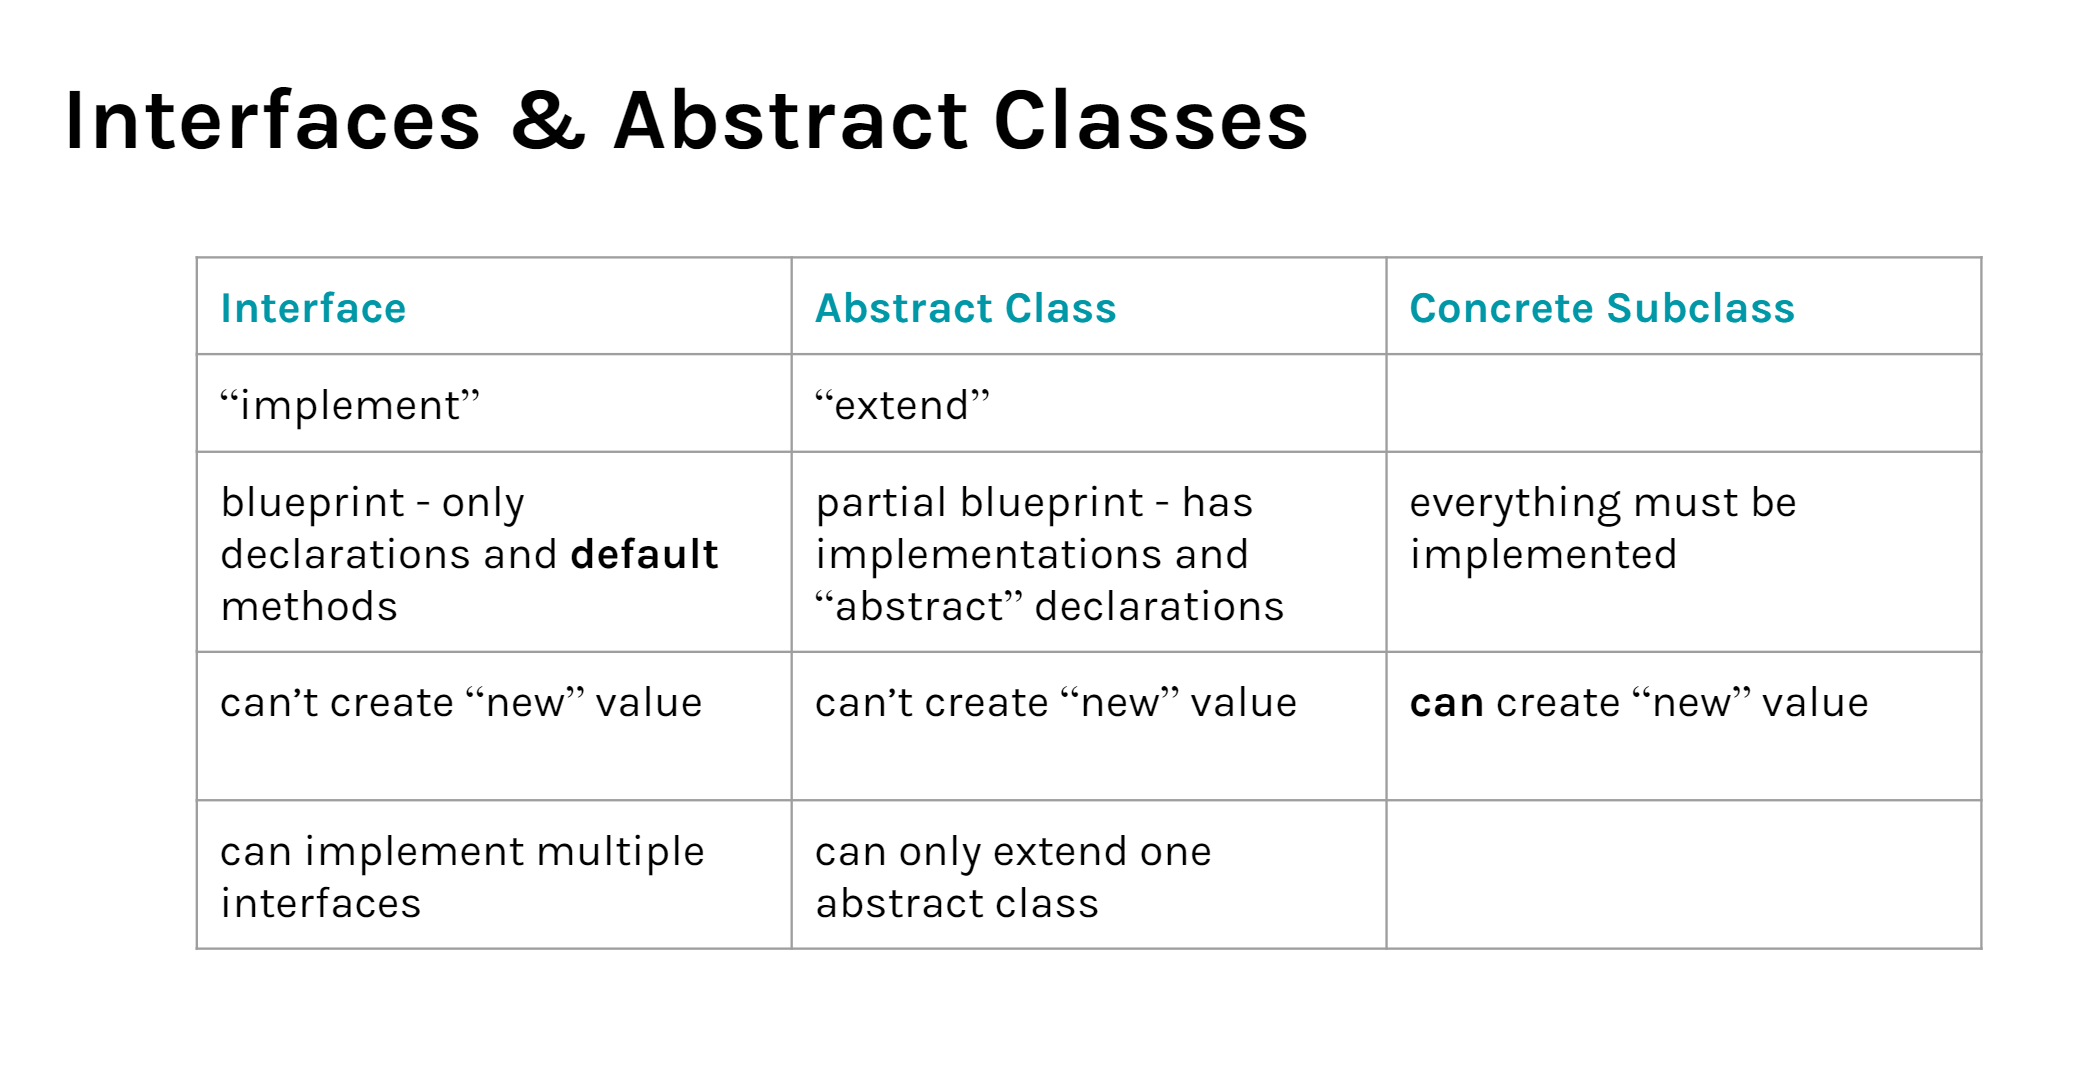 A chart comparing the differences between the types of classes.